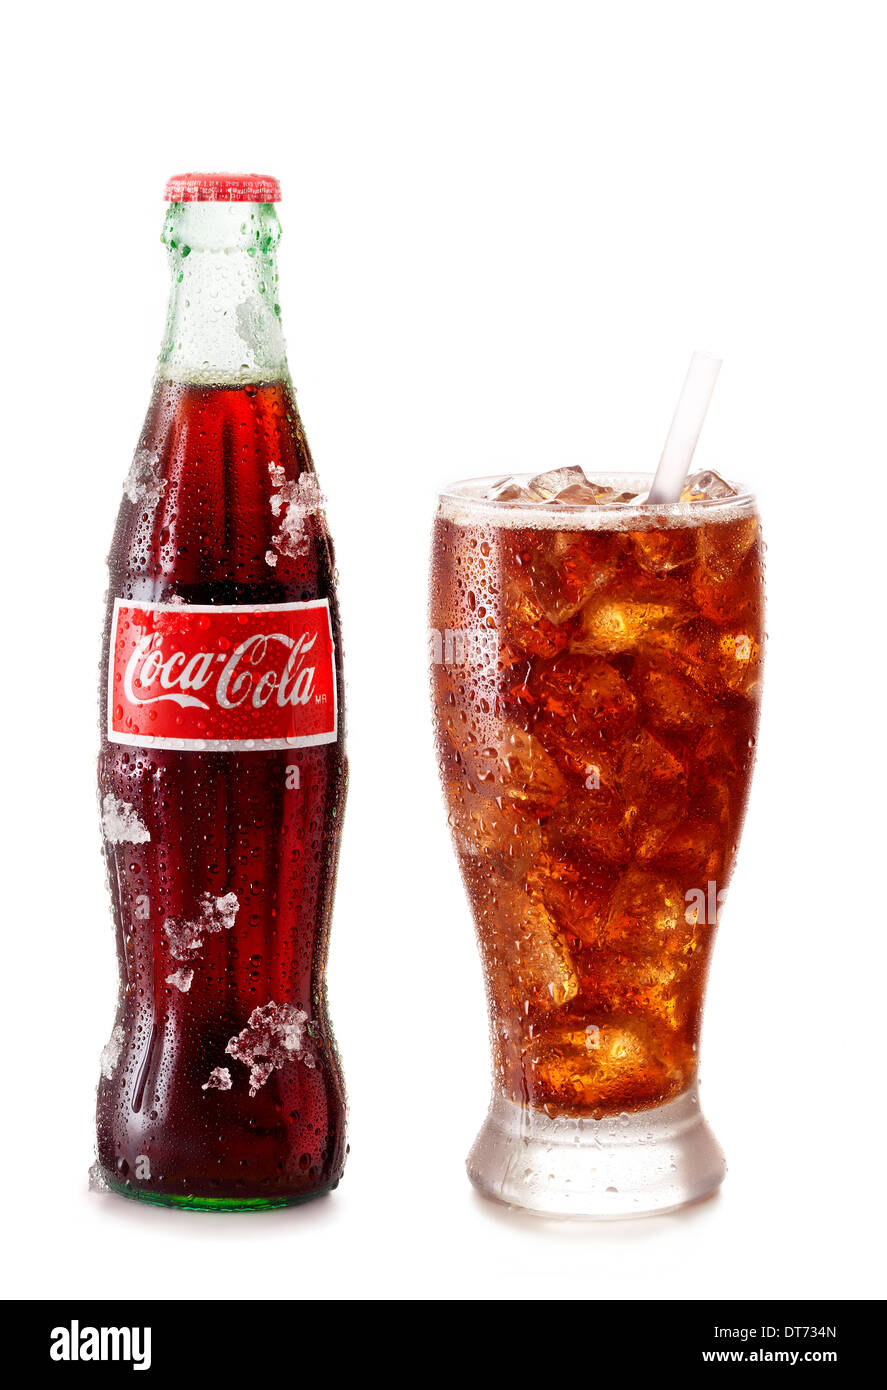 An icy cold bottle of coke with an icy cold glass of coke right next to it on a white background. Stock Photo